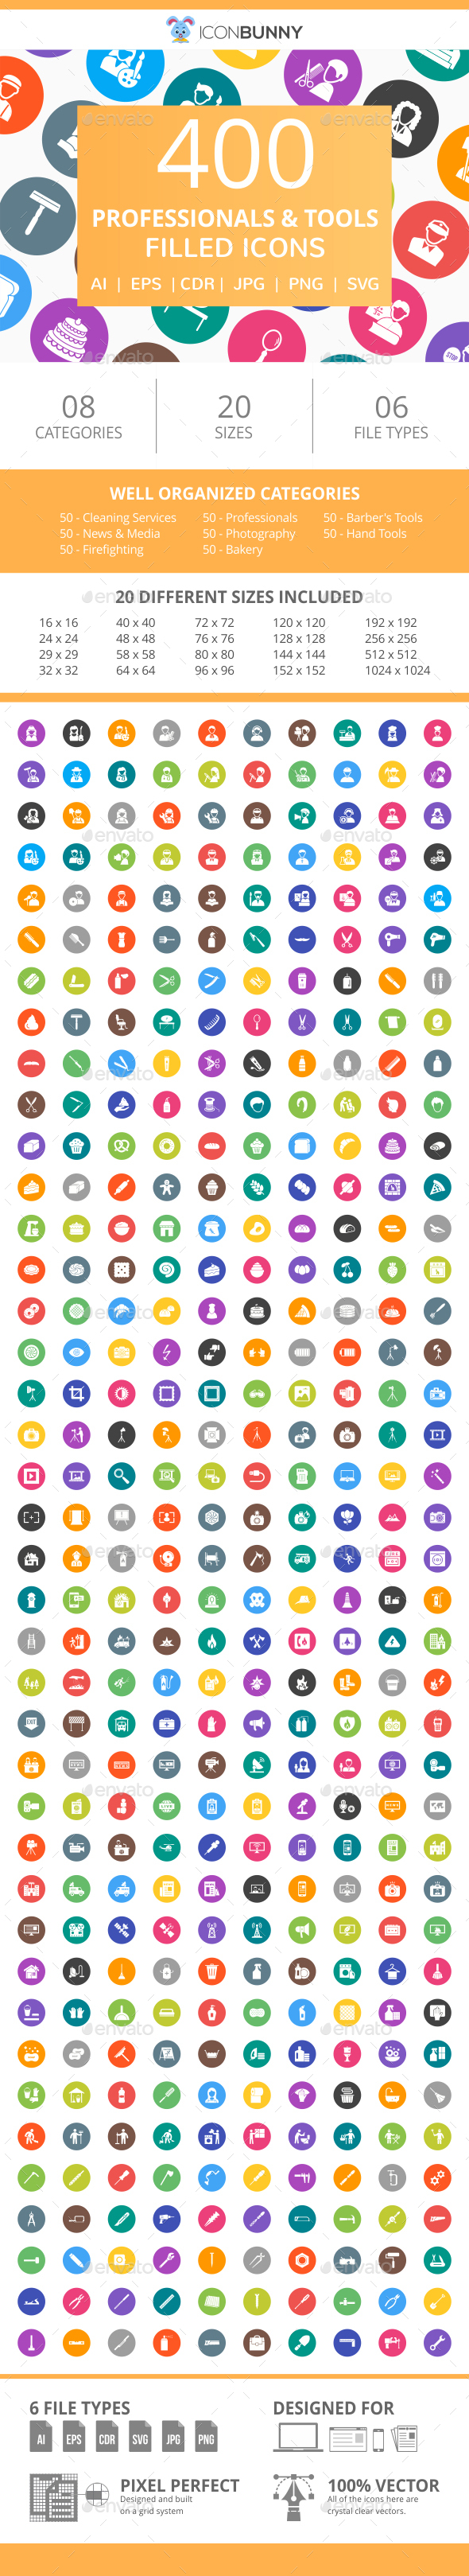 400 Professionals & their tools Filled Round Icons